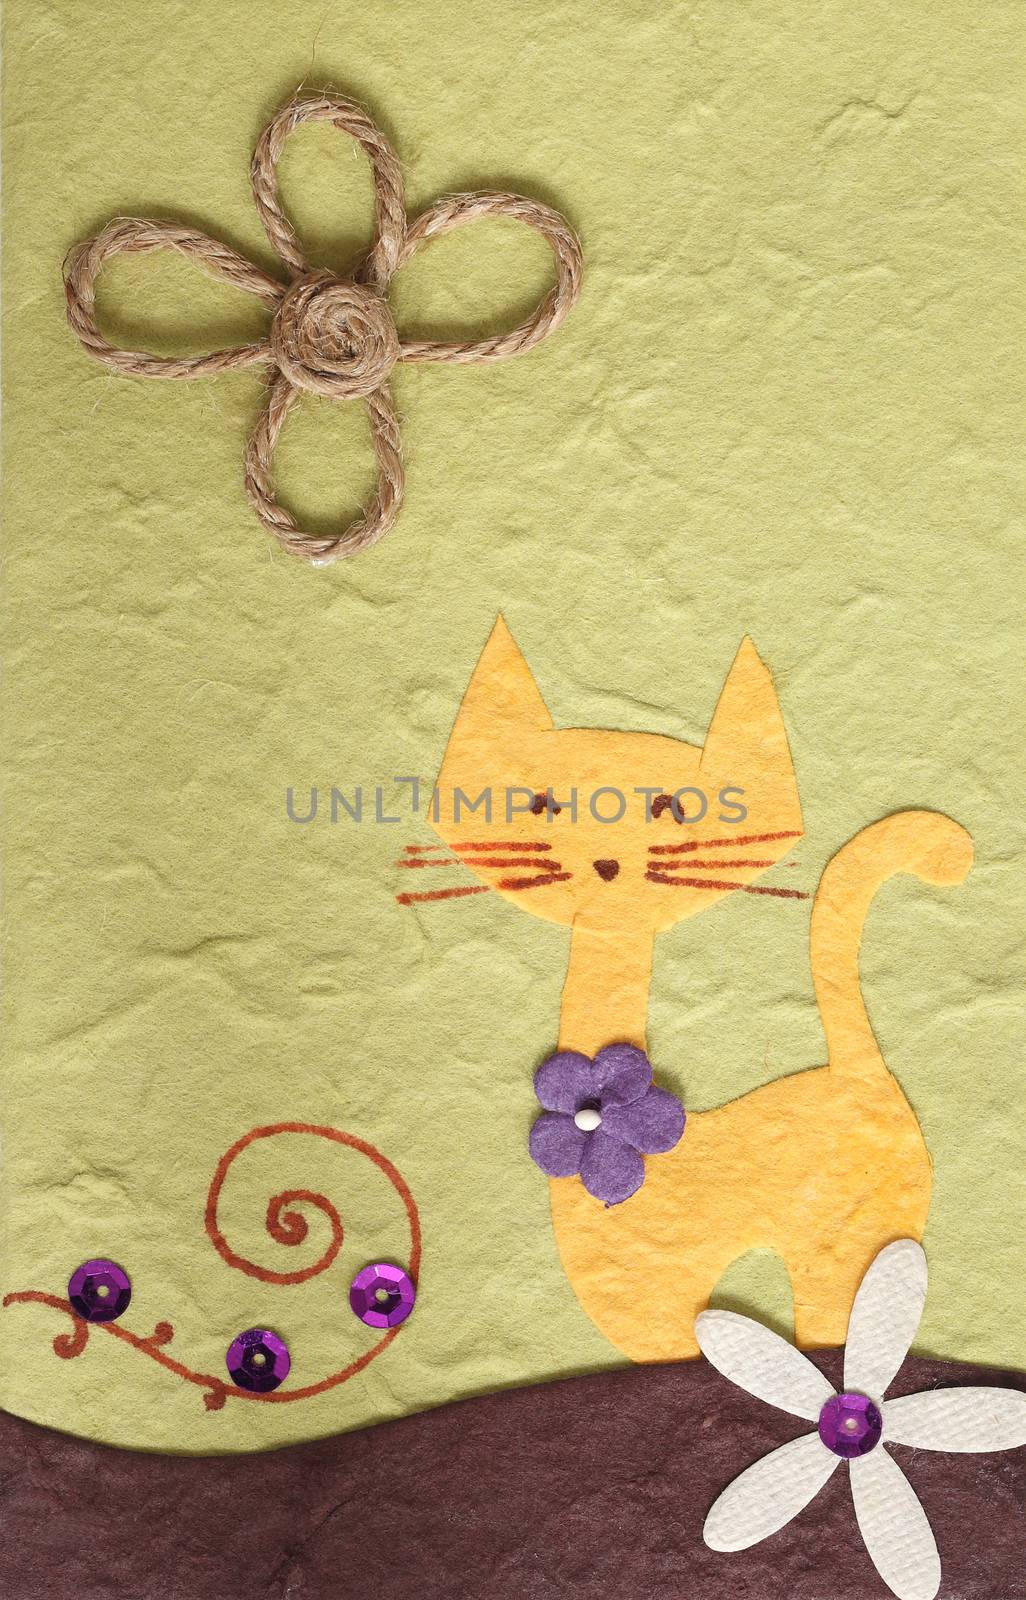 Papercraft Cat and flower background by piyato